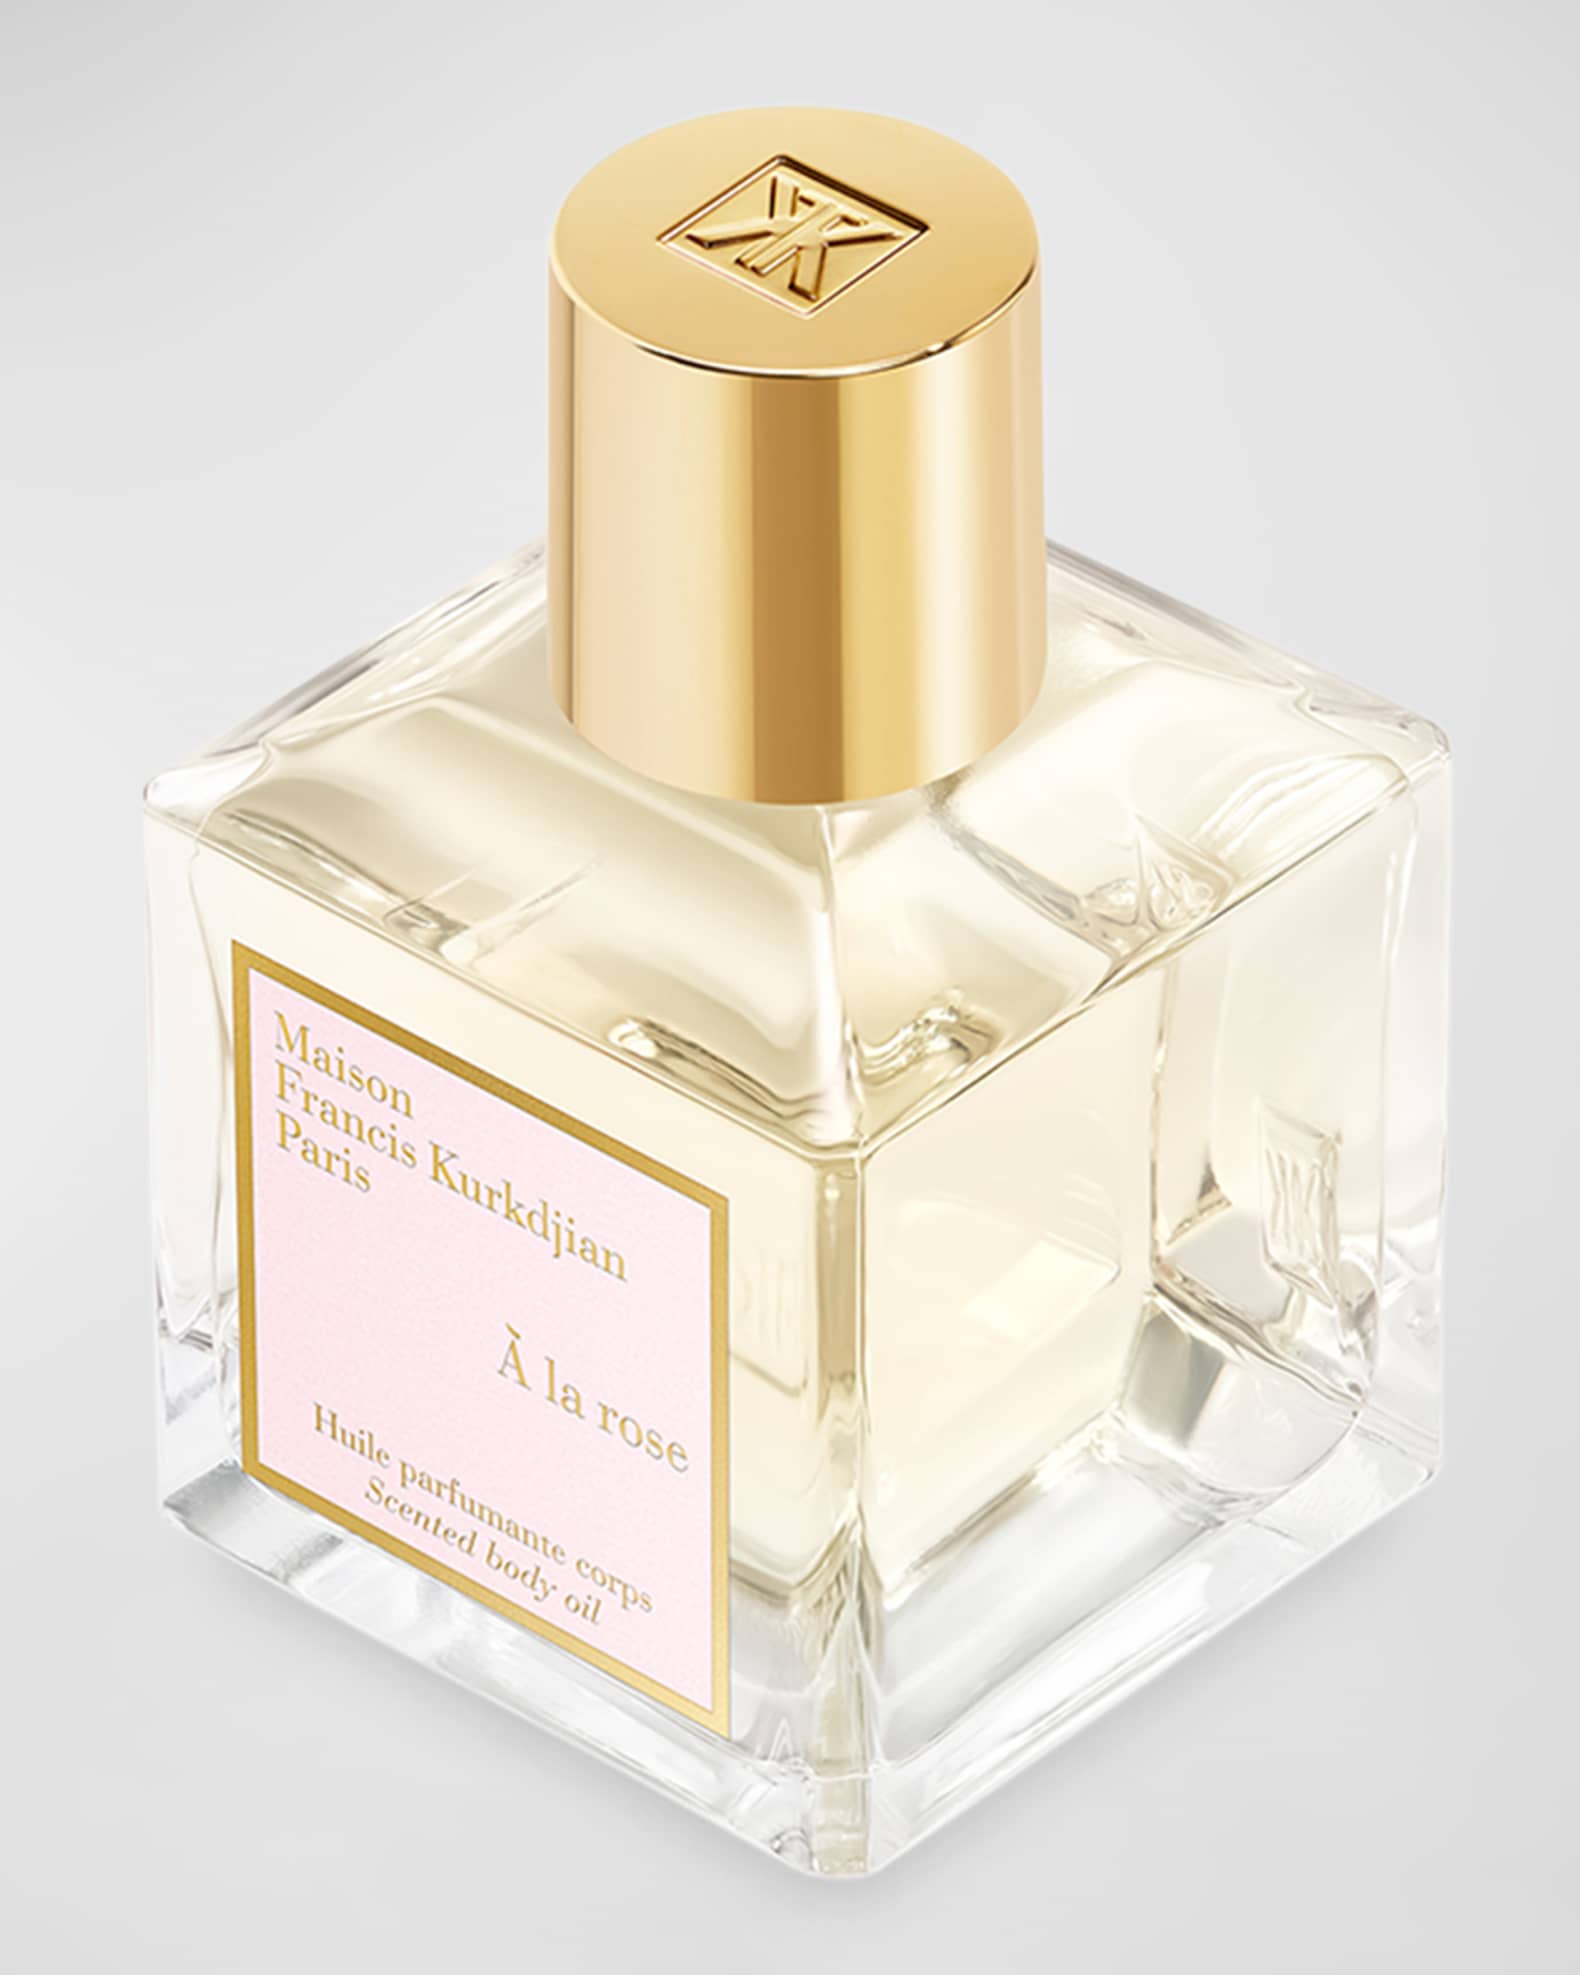 J'Adore by Dior: Floral radiance by Francis Kurkdjian - Paris Select